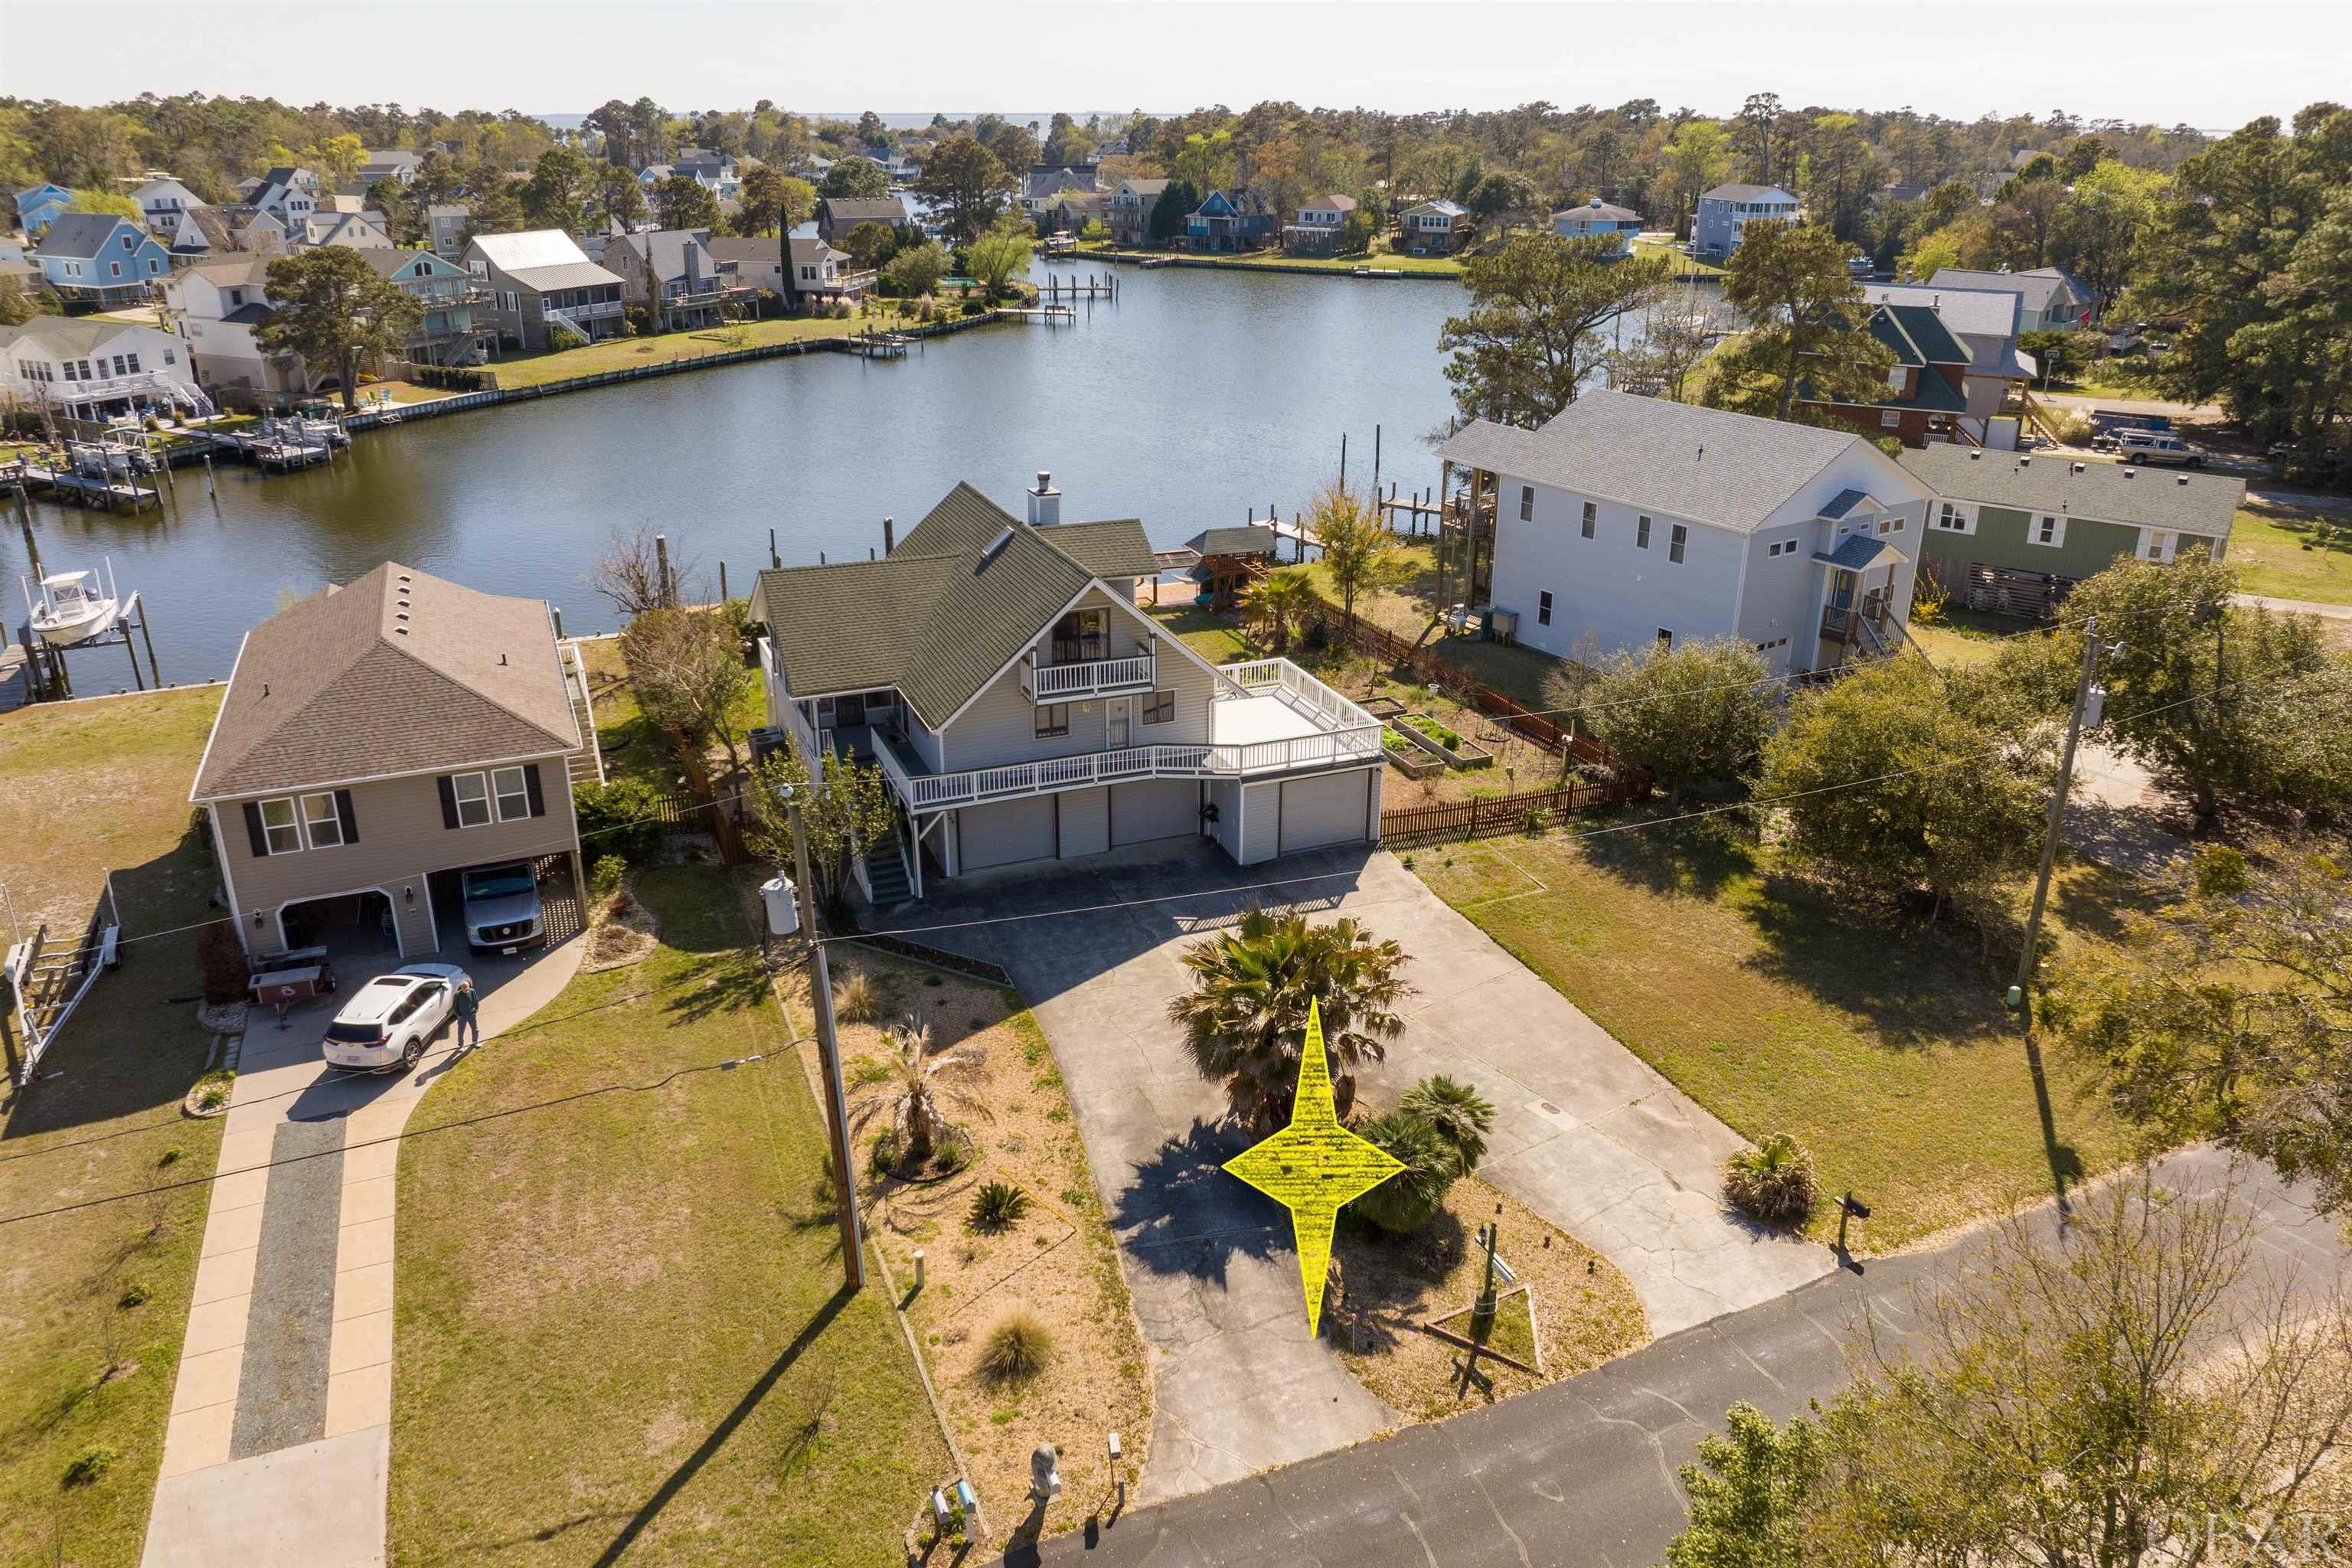 This magnificent custom built home is situated on two lots, fronts big water and is truly a boaters paradise! There is a boat lift, boat dock, floating dock for canoes & kayaks and a boat slip which will accommodate a 40' trawler. Enjoy a 3-car garage to store all your vehicles, small watercraft and an endless supply of equipment & accessories. With almost 15,000sf of waterfront property, there is plenty of room for gardening, growing fruits & vegetables, all within a mature fenced & landscaped yard with a variety of Palms, fruit trees & assorted plants. Decks and porches wrap entirely around the home with almost 1000sf of open decks, including retractable awnings in strategic locations. A 16x10 screened in porch with tile floors is great for sitting & eating outdoors. Covered entry plus a dry entry with interior stairs accessed through the garage. Additional features include a new 50 year bulkhead in 2020, LVT flooring installed in 2022, 50 yr Timberline roof shingles in 2007, new septic field in 2016 plus Trex decking, seamless gutters, Anderson sliding doors & water heater all recently completed. Original owners selected this ideal location to take advantage of the southwest breezes, the wide section of canal for great views and an easy boat ride out to the sound! This unique Chalet style home was custom designed, built with quality materials and features huge roof overhangs for shade and opening windows. Storm shutters are easy to install and will help provide peace of mind. One of the first homes on the street, this place has been well maintained over the years including numerous upgrades & improvements. Breathtaking views from almost every location around the home. A 2-zone HVAC system (new coils in '22) keeps the home comfortable in summer & winter, plus a gas log fireplace in the living room. 3BR 2BA in the main living area, there is also a finished bonus area on the ground level, partially heated with 3/4 bath, not included in the heated area. This space has tile floors and styrofoam insulation behind wainscoting. This property has so much to offer and one truly needs to see this home in person to appreciate all the wonderful features it has. If you have been looking for a waterfront property, then this just might be the one!